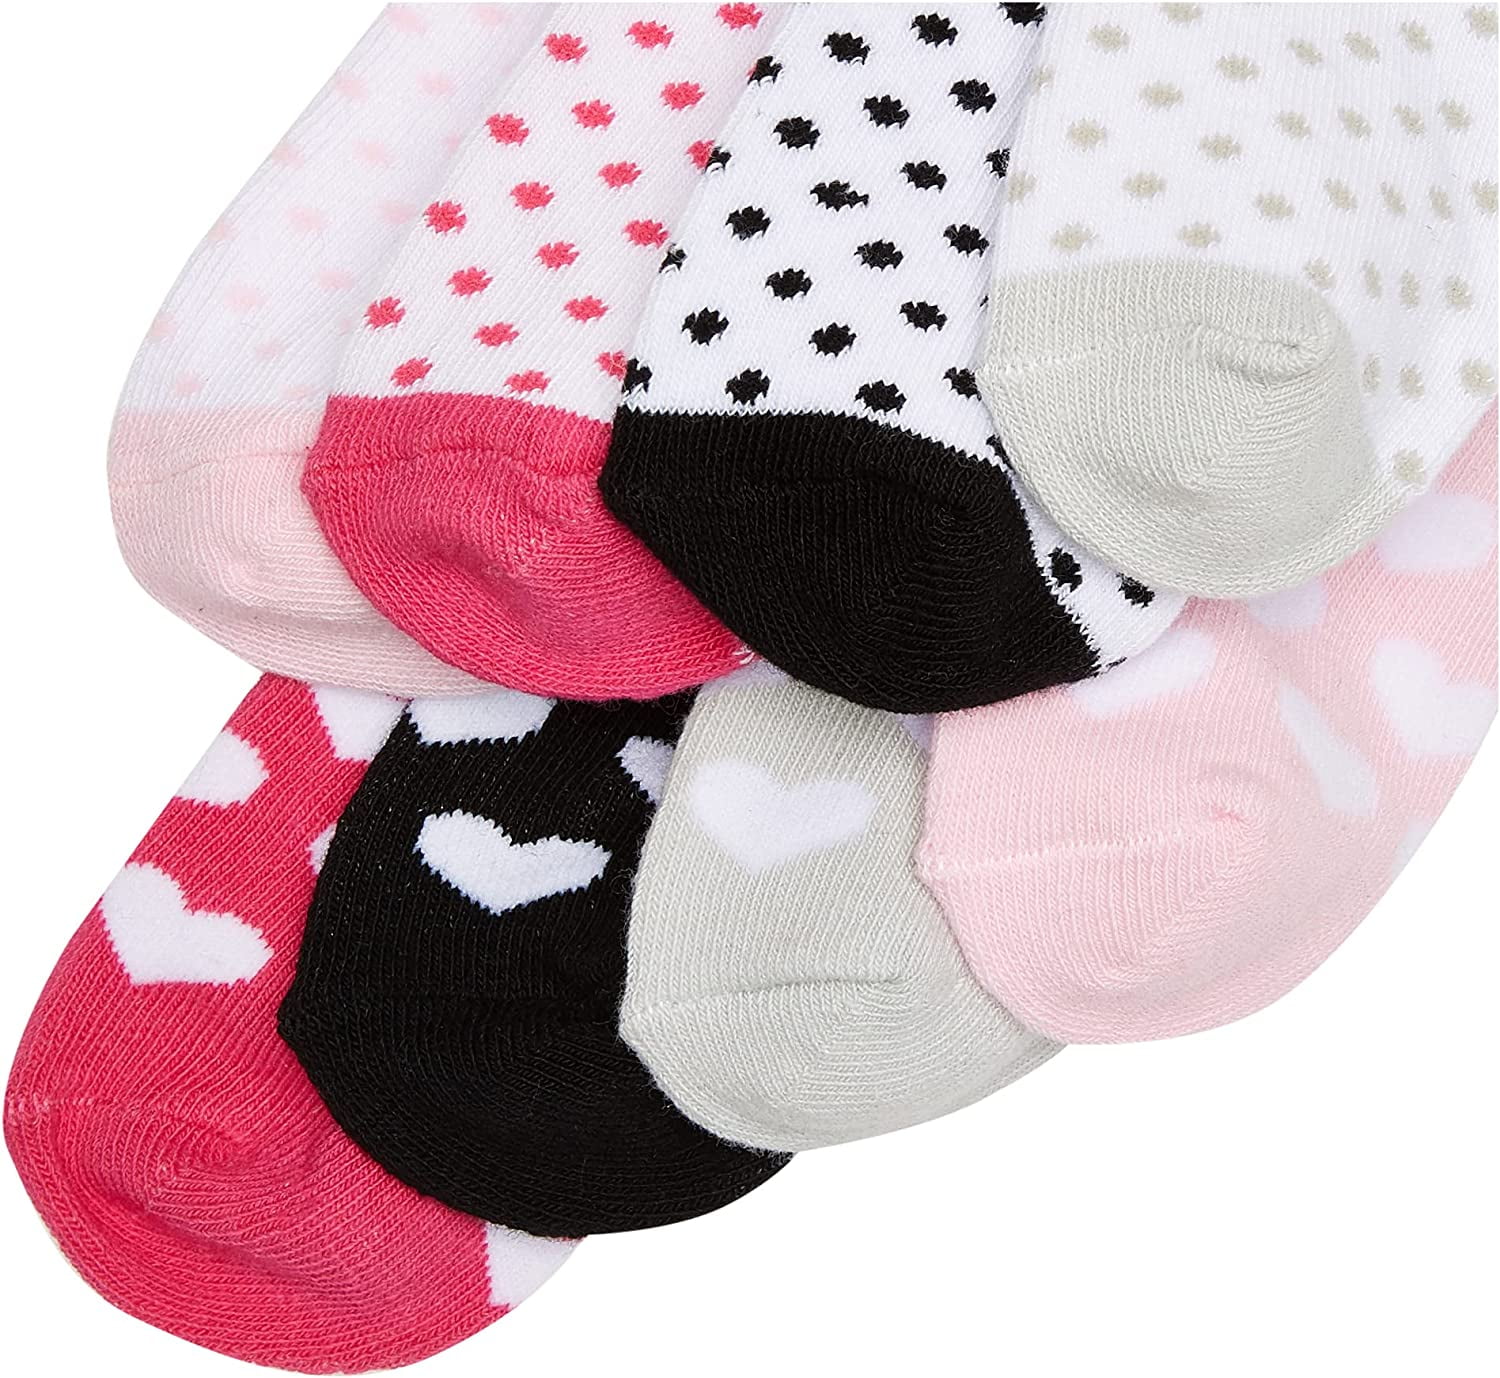 Luvable Friends Baby Girl Fun Essential Socks, Black Pink Bow, 0-6 Months